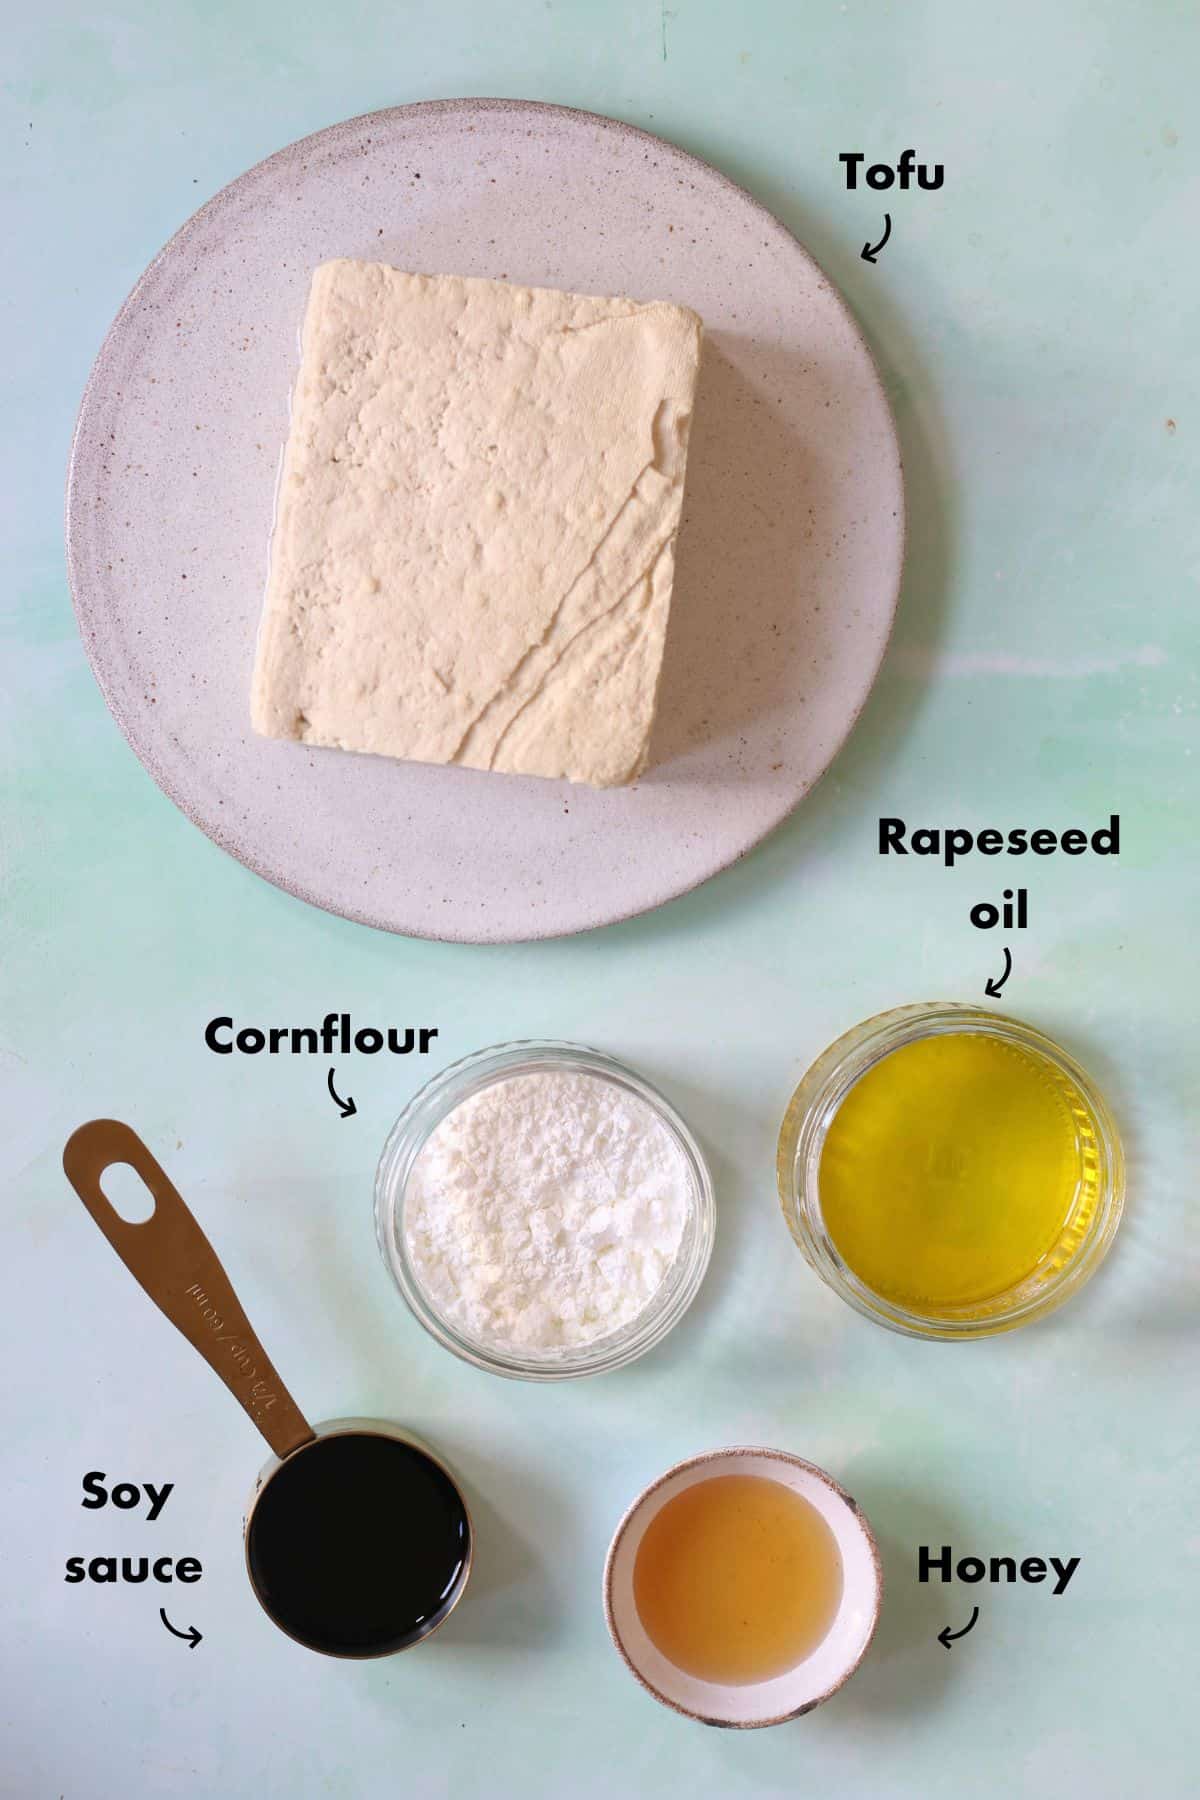 Overhead shot of ingredients to make crispy tofu laid out on a plae blue background and labelled.